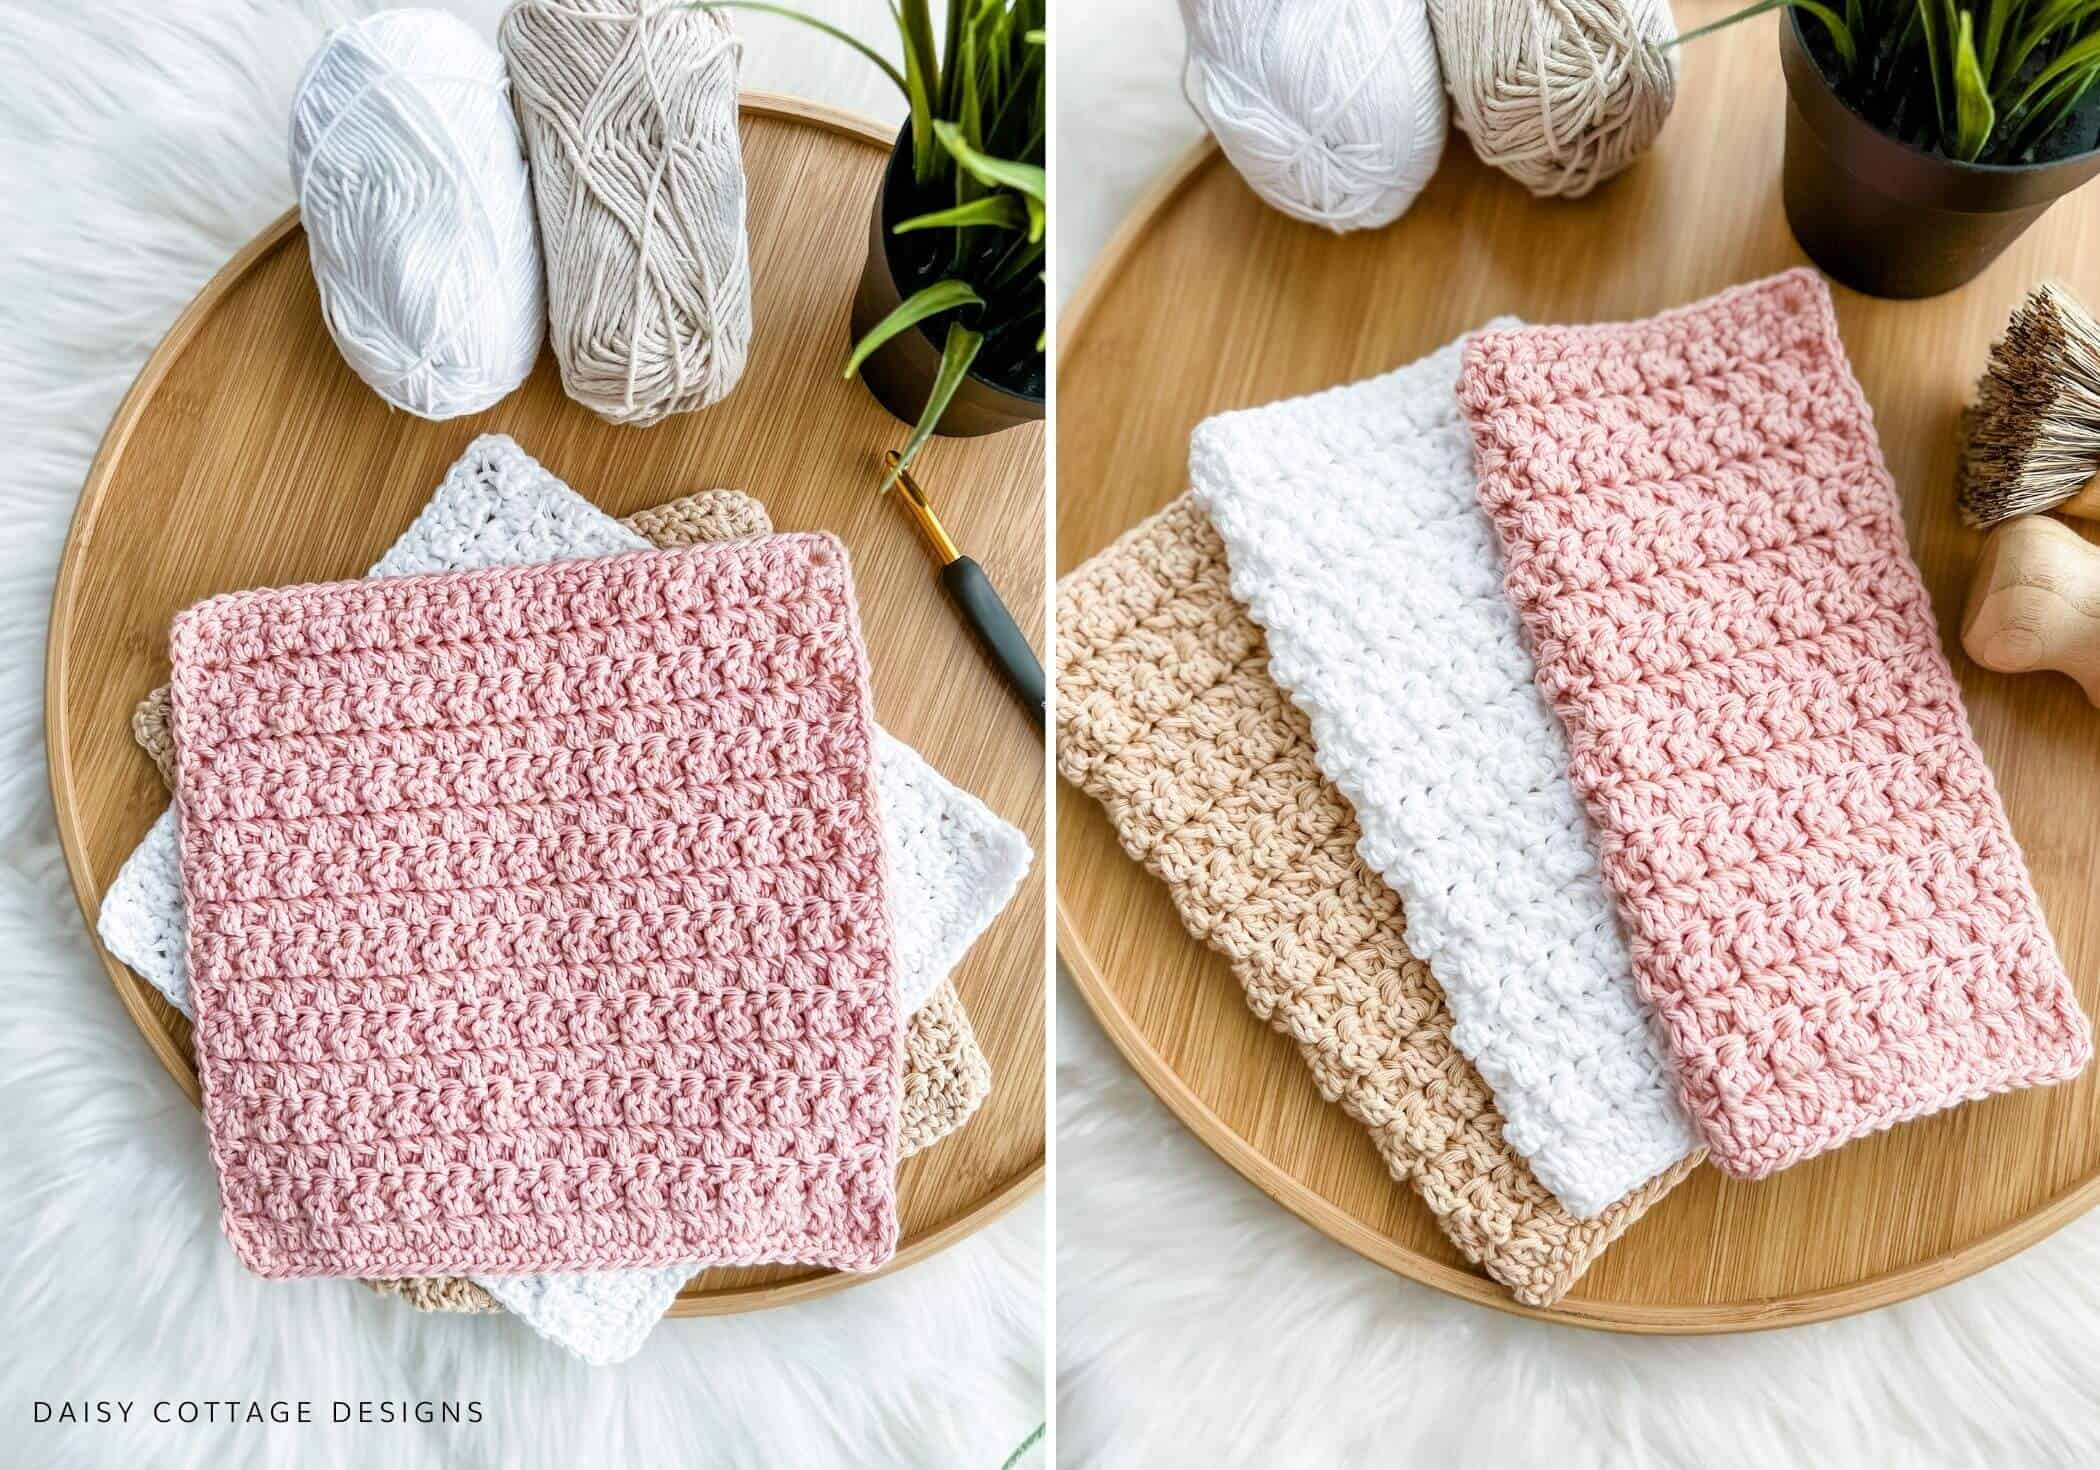 Textured dishcloths in pink, white, and tan